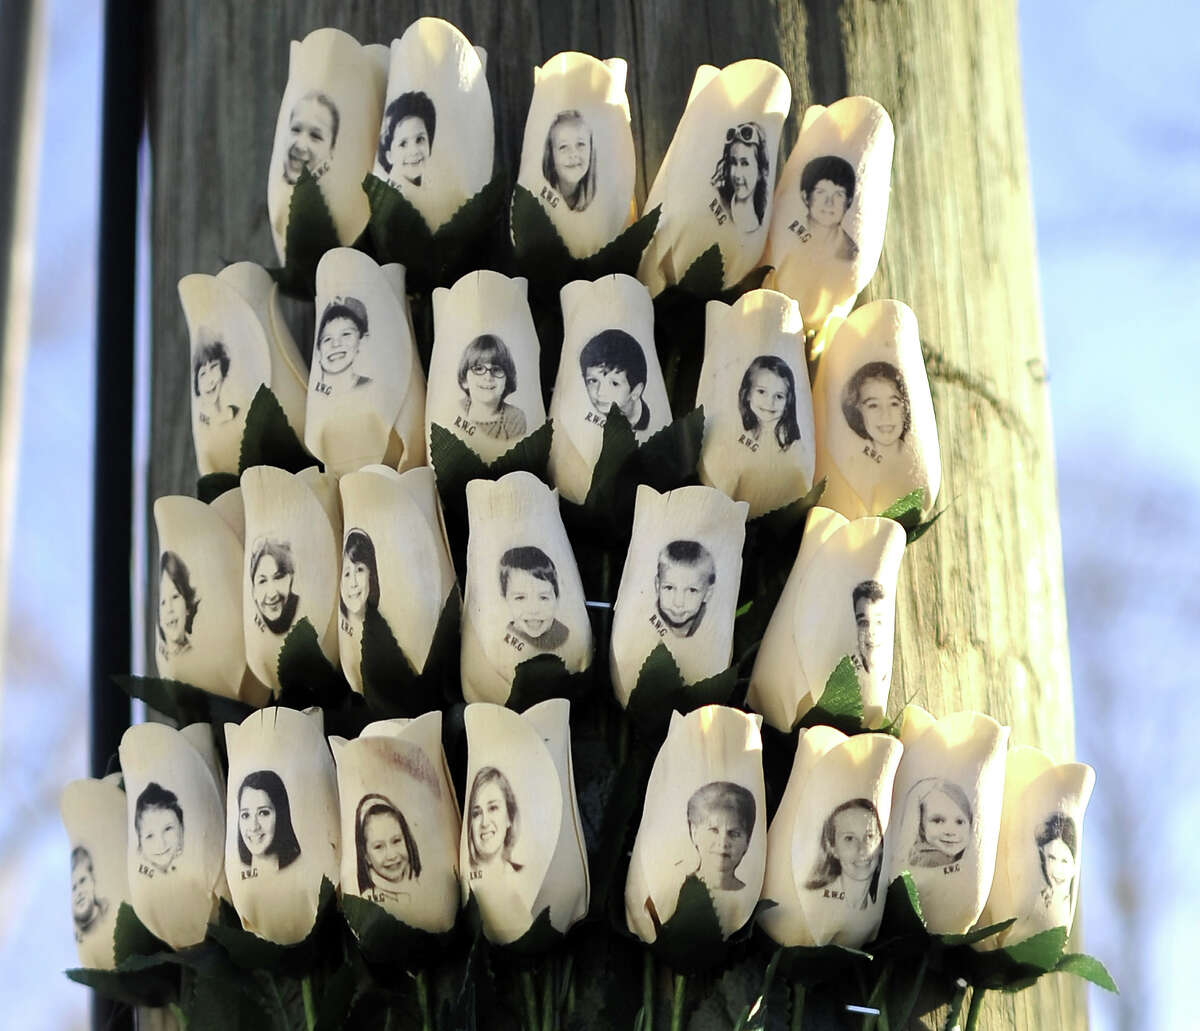 Roses with the faces of the Sandy Hook Elementary students and adults killed are seen on a pole in Newtown, Connecticut on January 3, 2013.